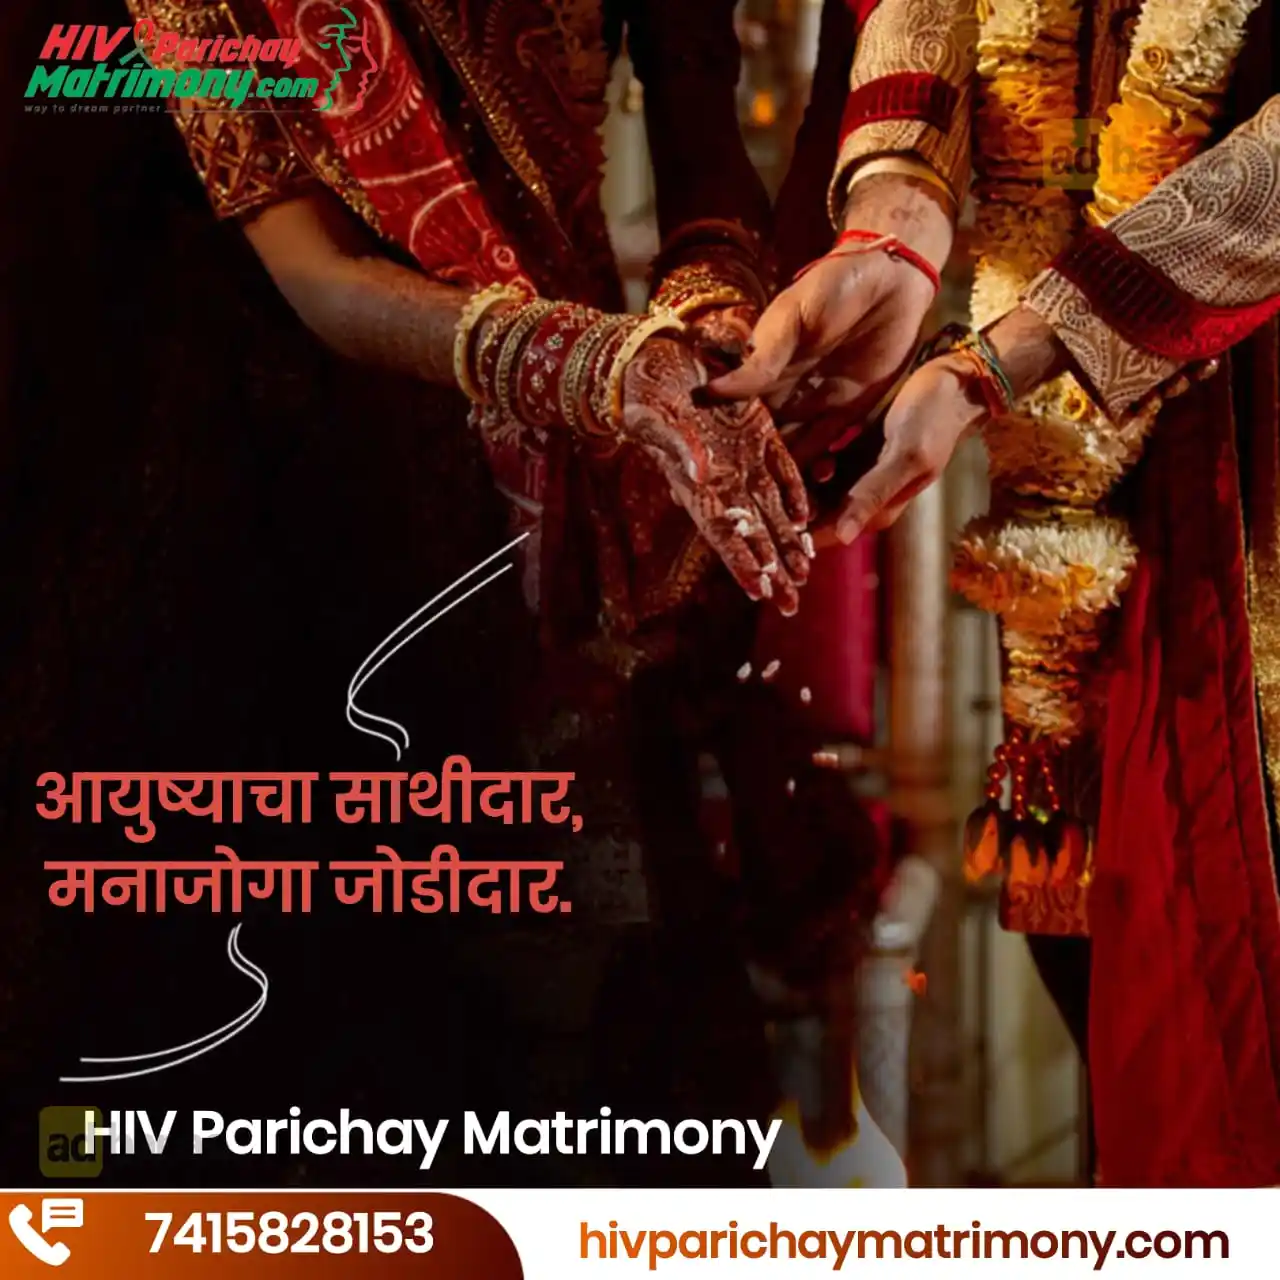 Which is best HIV matrimony site for Second Marriage?